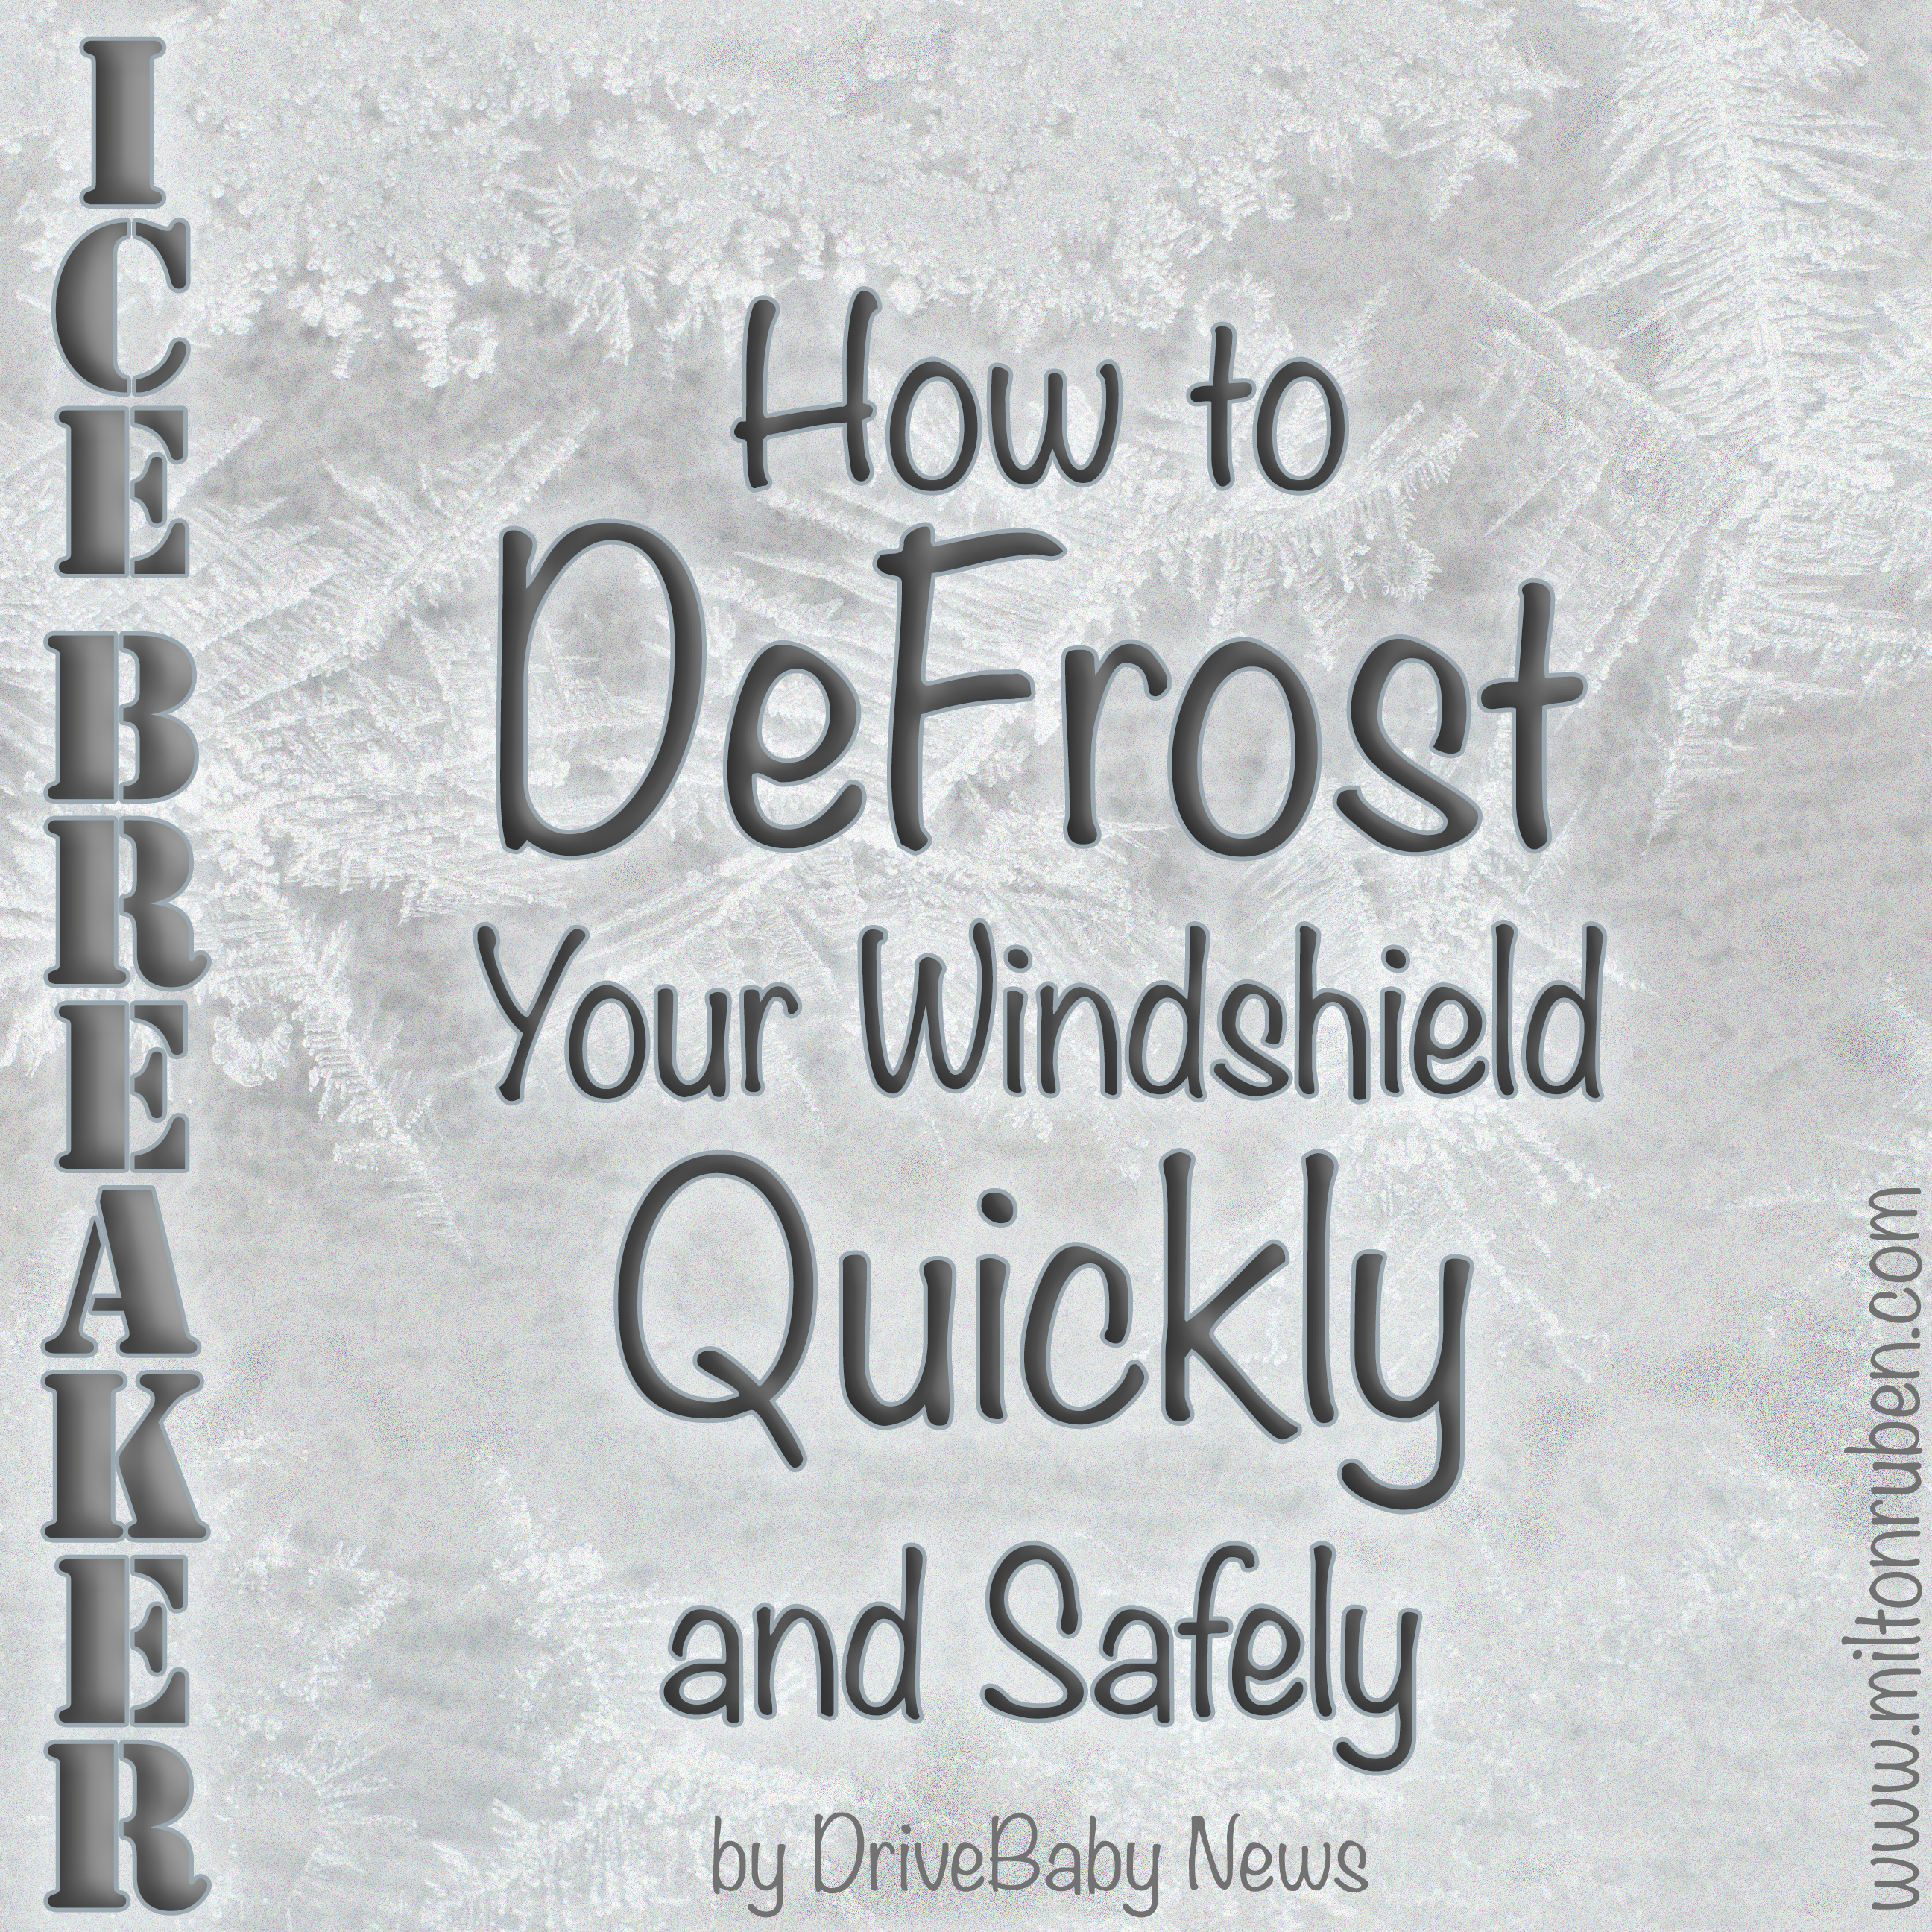 The Quickest Way to De-Ice Your Windshield